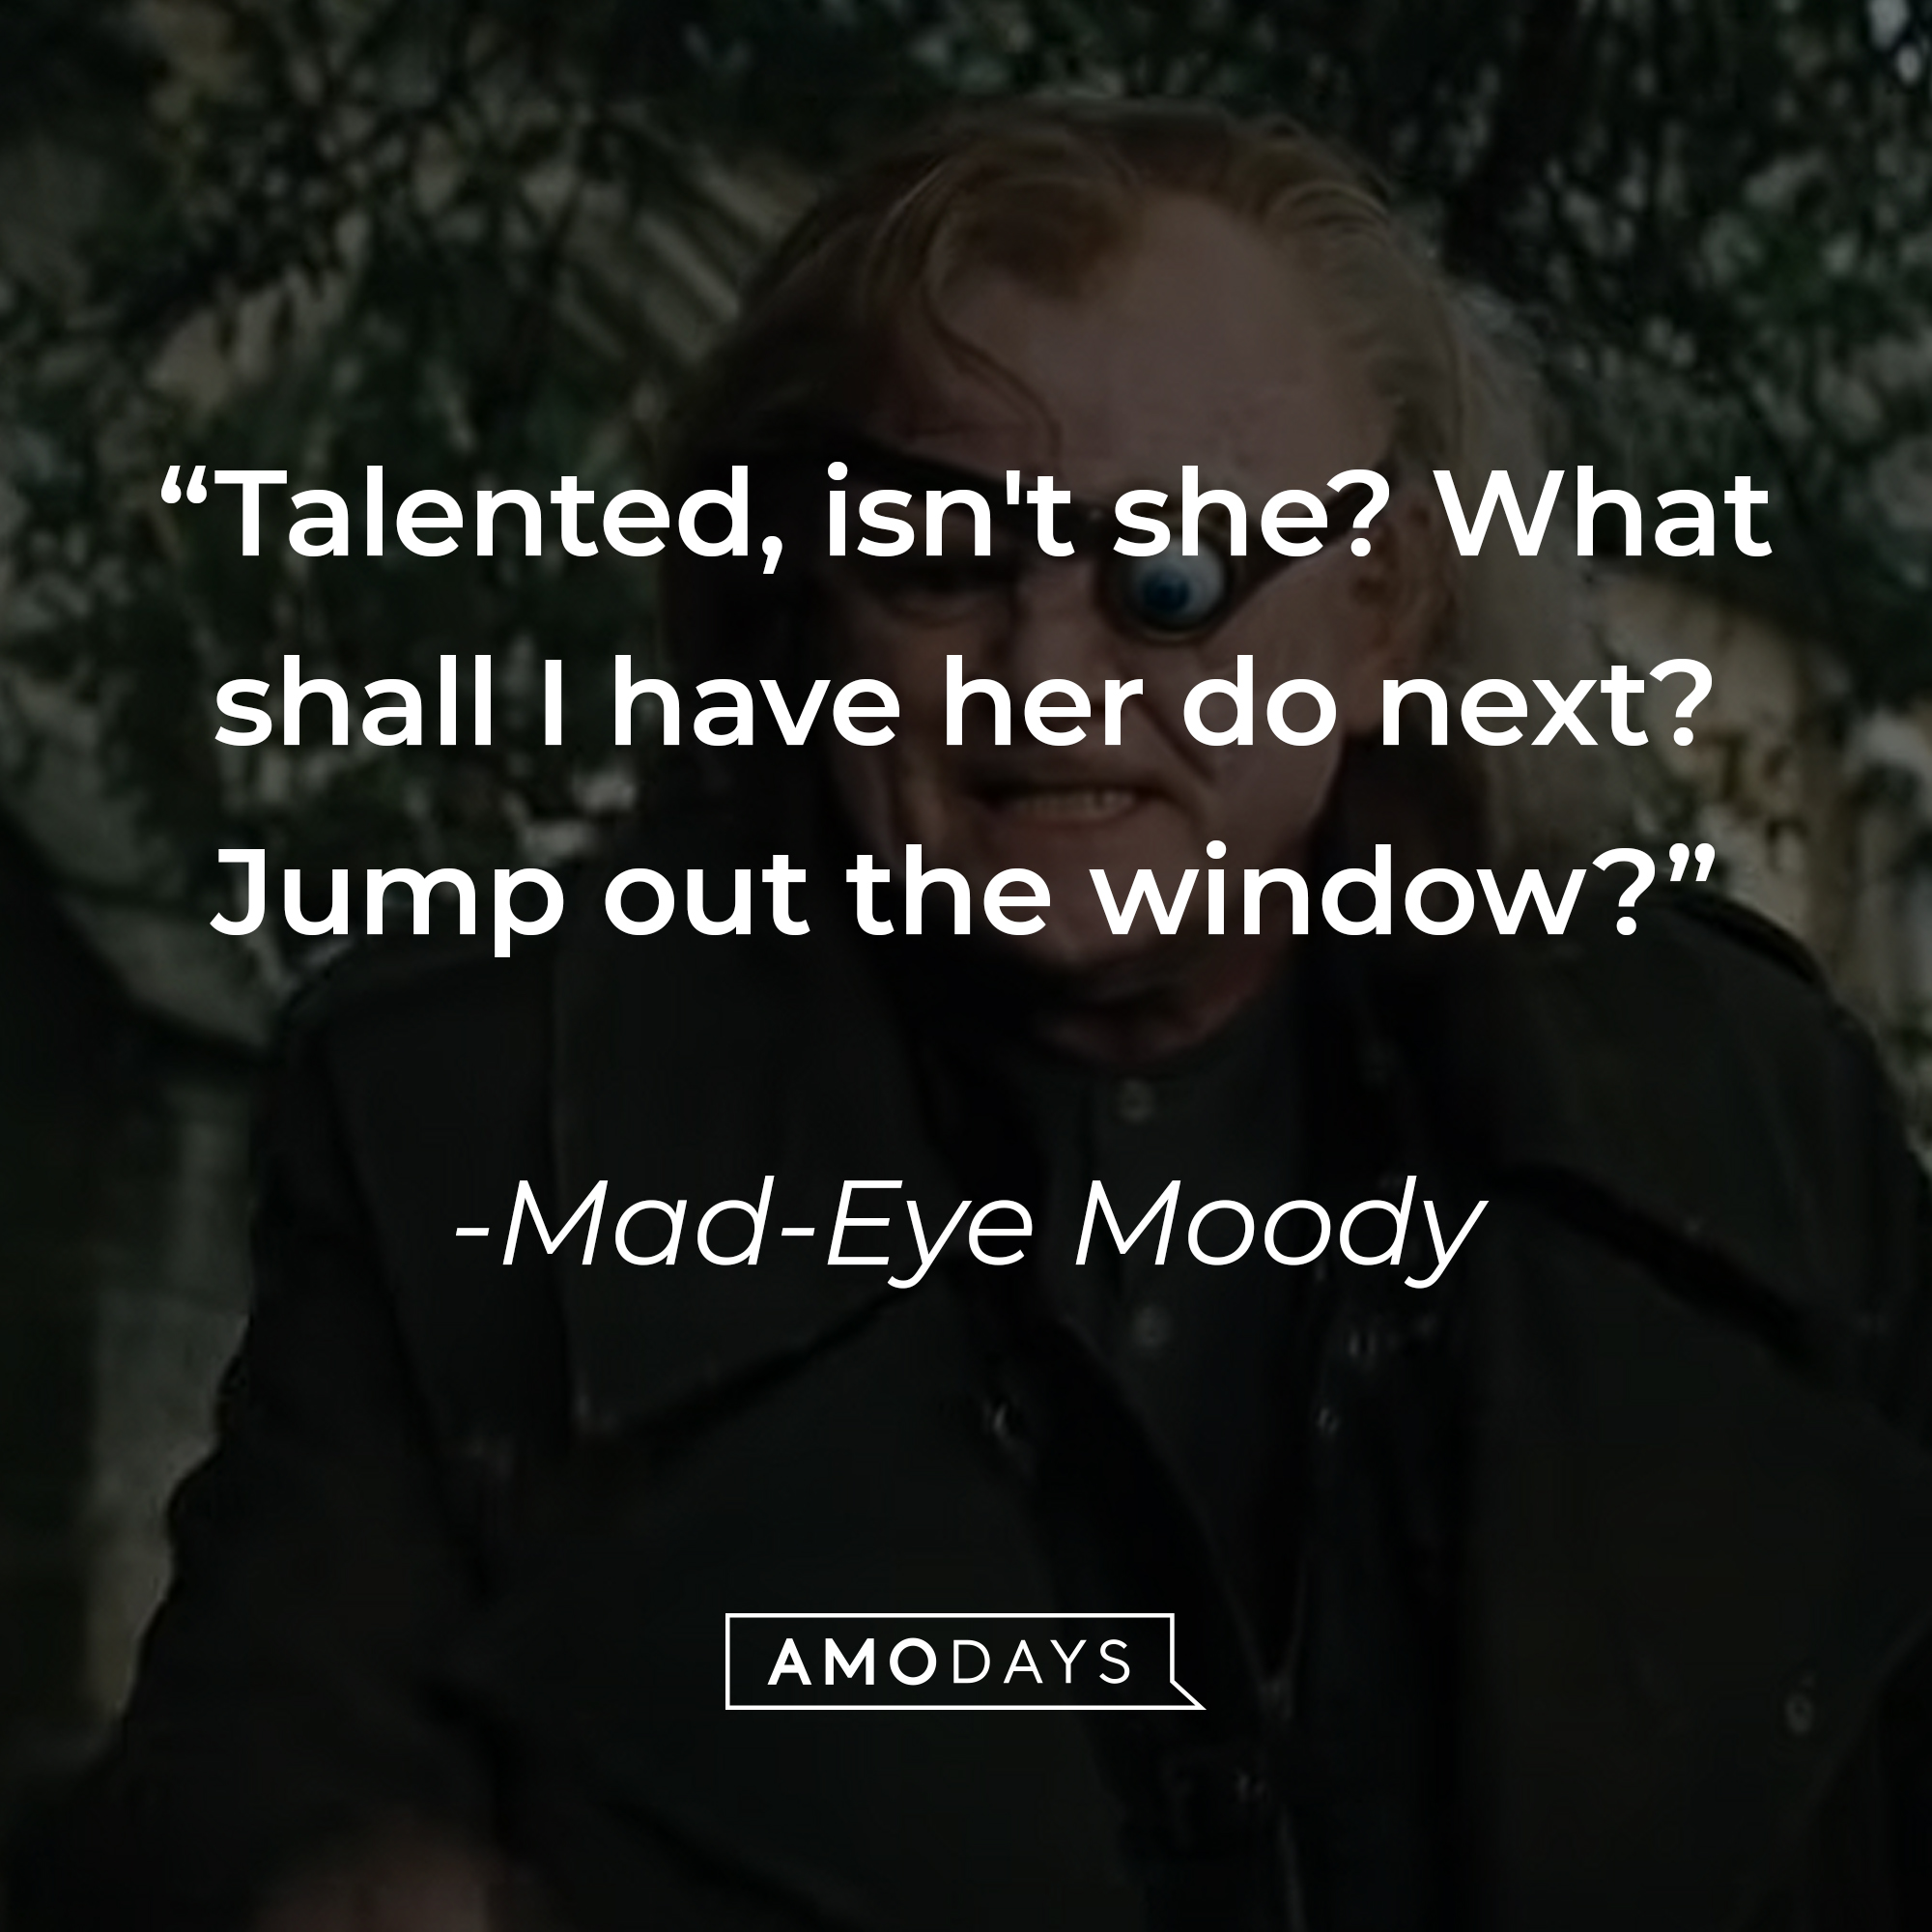 Mad-Eye Moody's quote: "Talented, isn't she? What shall I have her do next? Jump out the window?" | Source: youtube.com/harrypotter